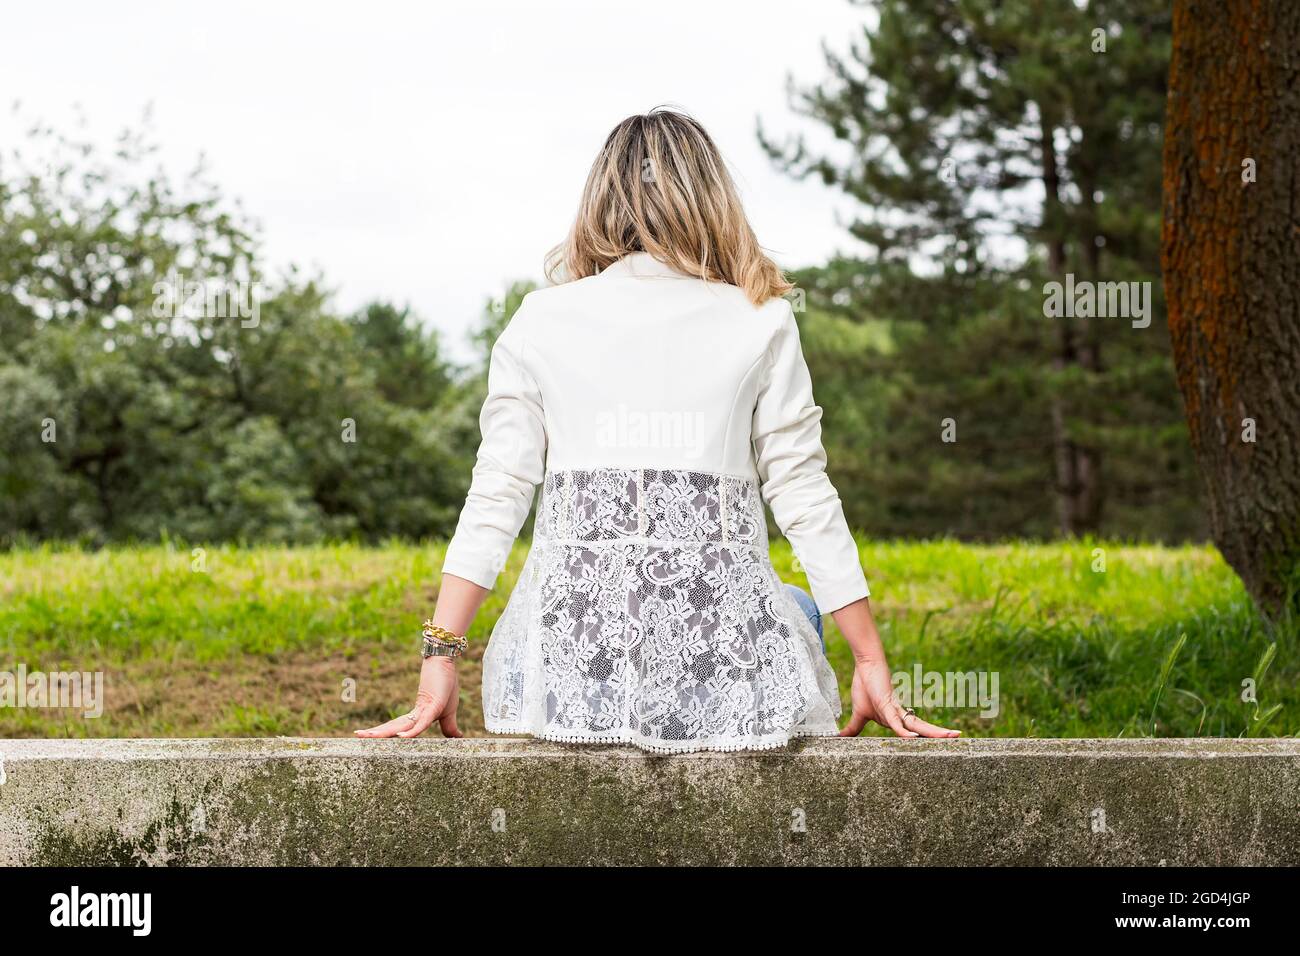 Blond haired woman sitting with her back to the camera on a stone bench in a park in Asturias, Spain.The woman is wearing jeans and a white jacket.Fas Stock Photo